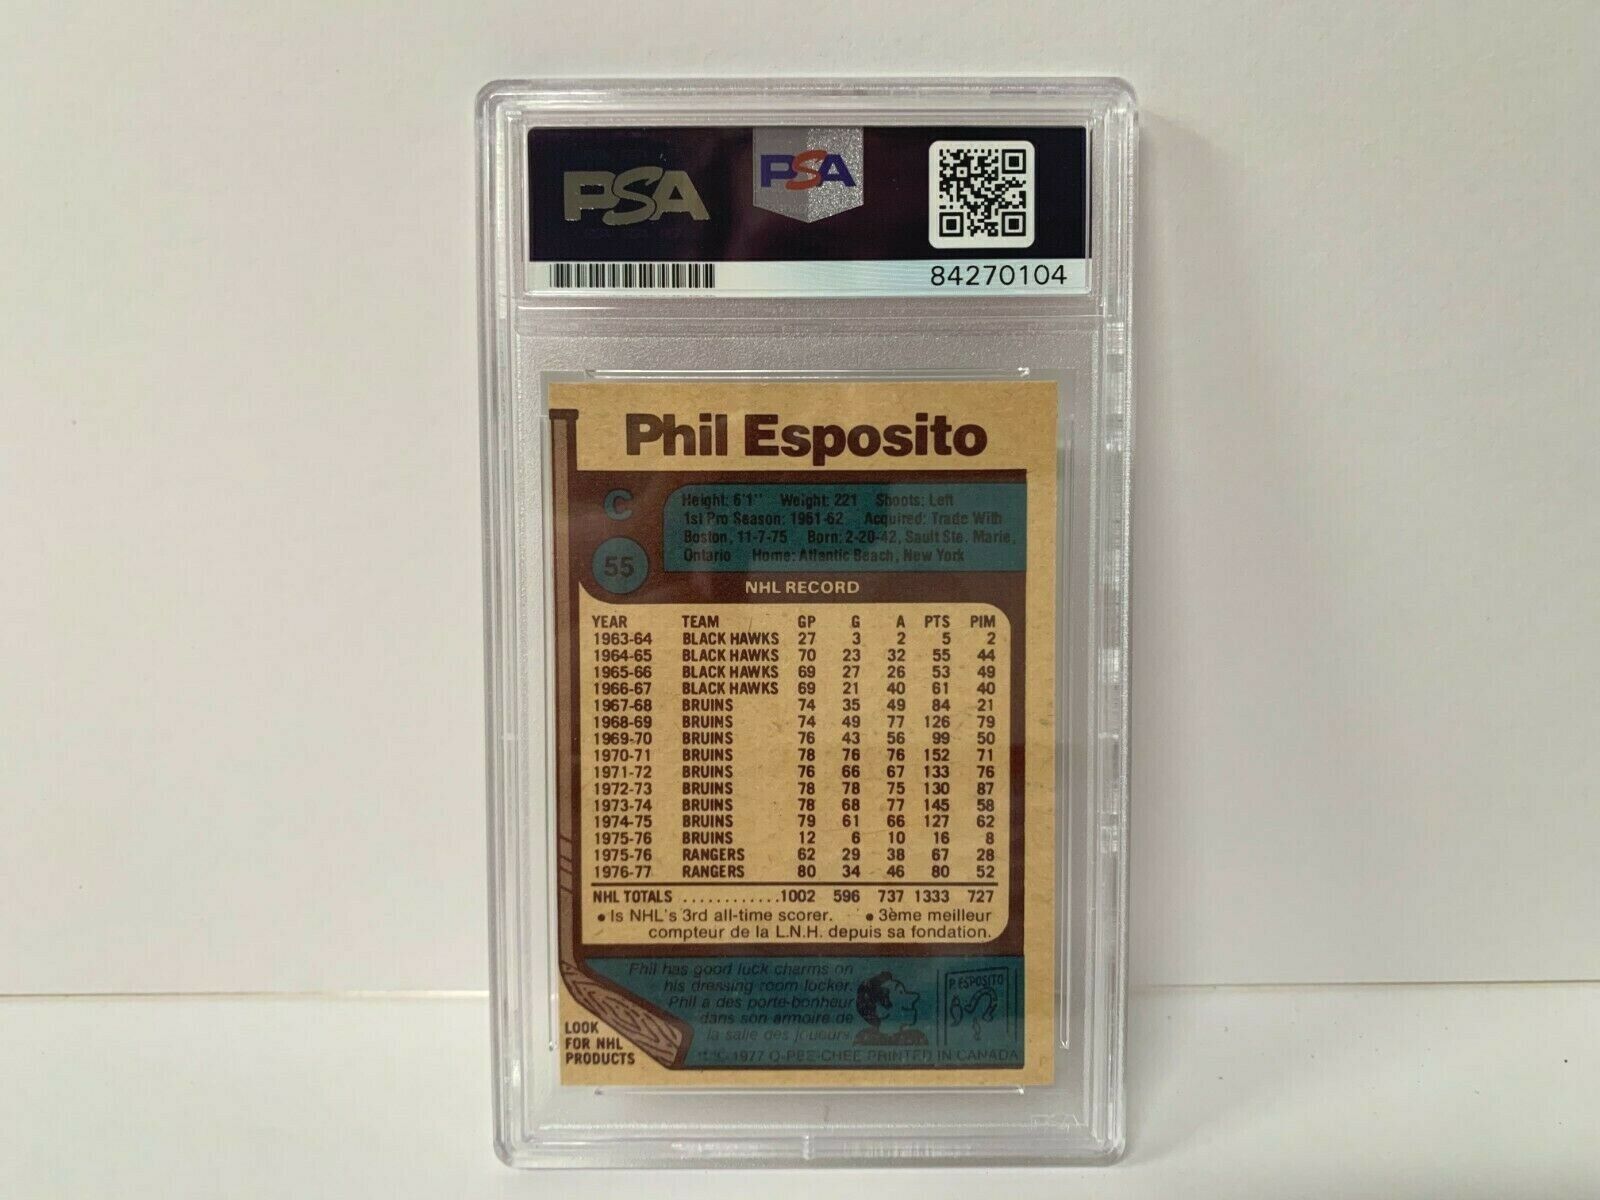 Phil Esposito Autographed Signed 77/78  OPC Card PSA Slabbed Certified 84270104